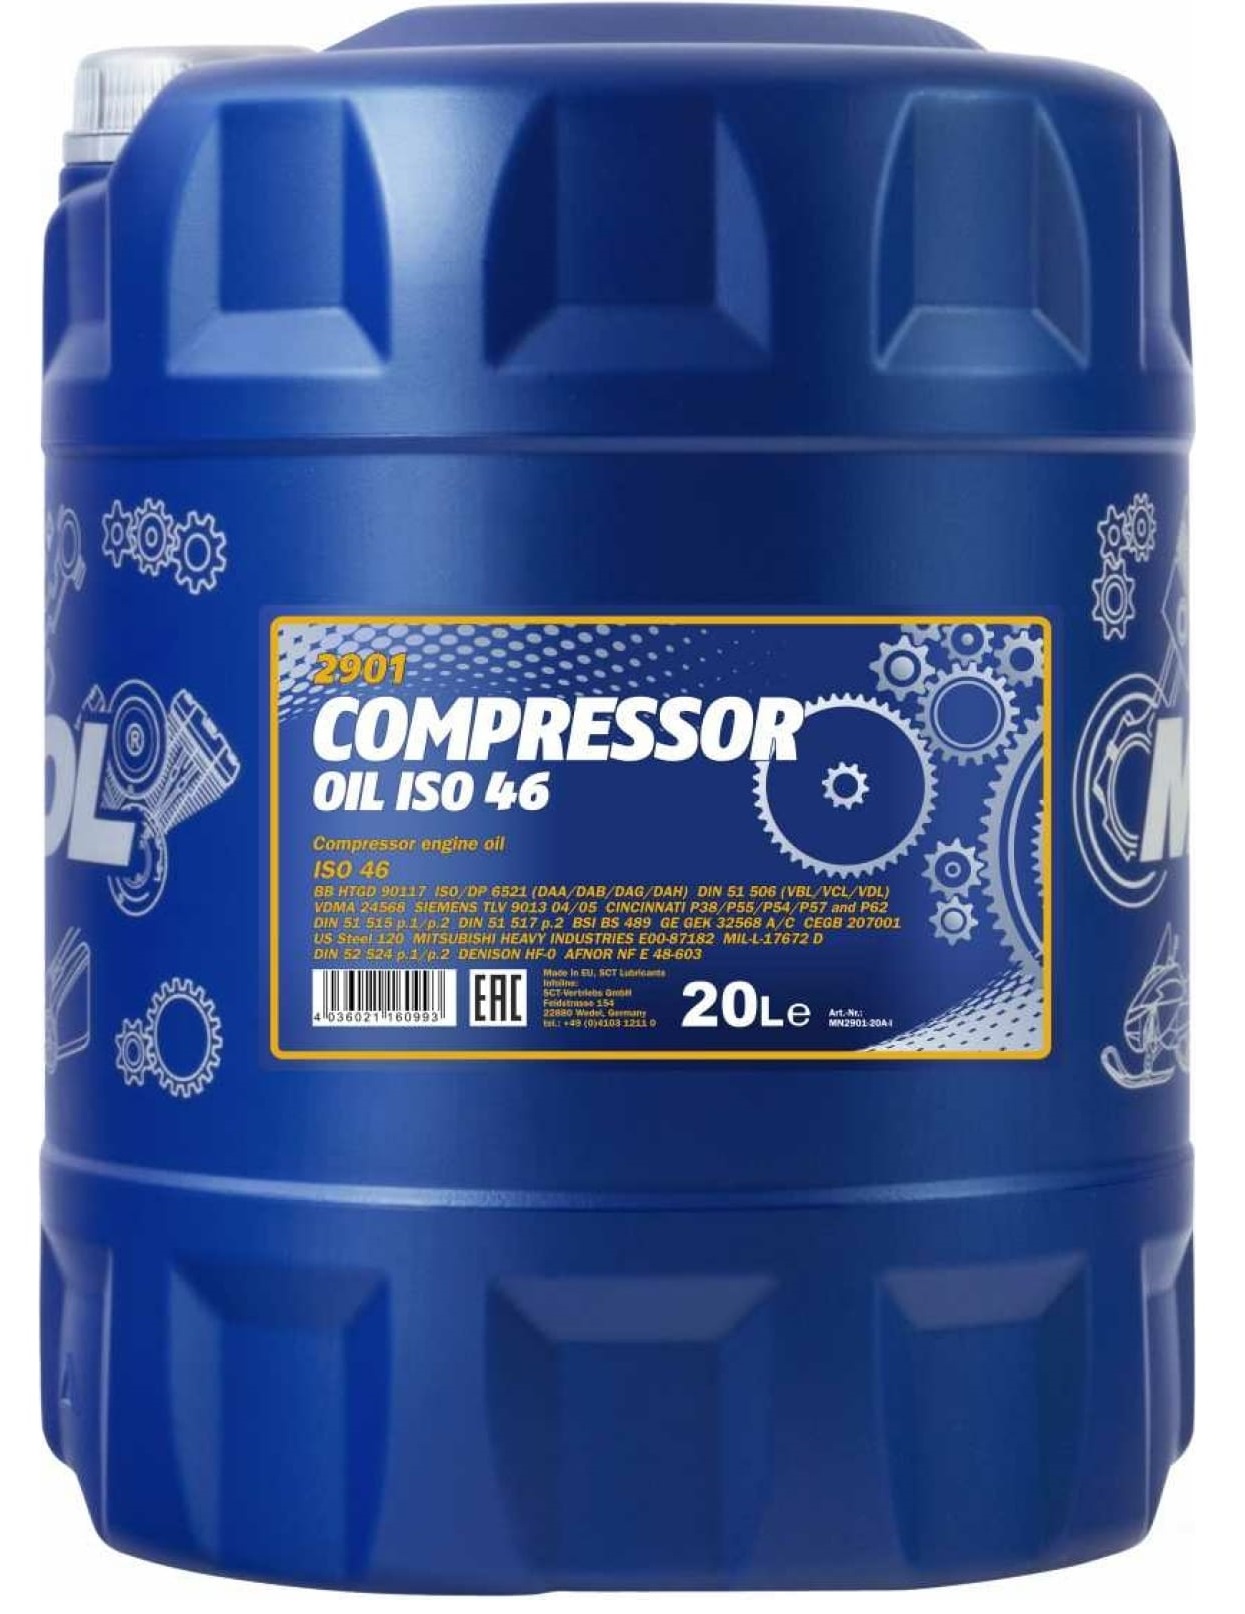 MANNOL 1935 Масло компр. Compressor Oil ISO 46 20 л.